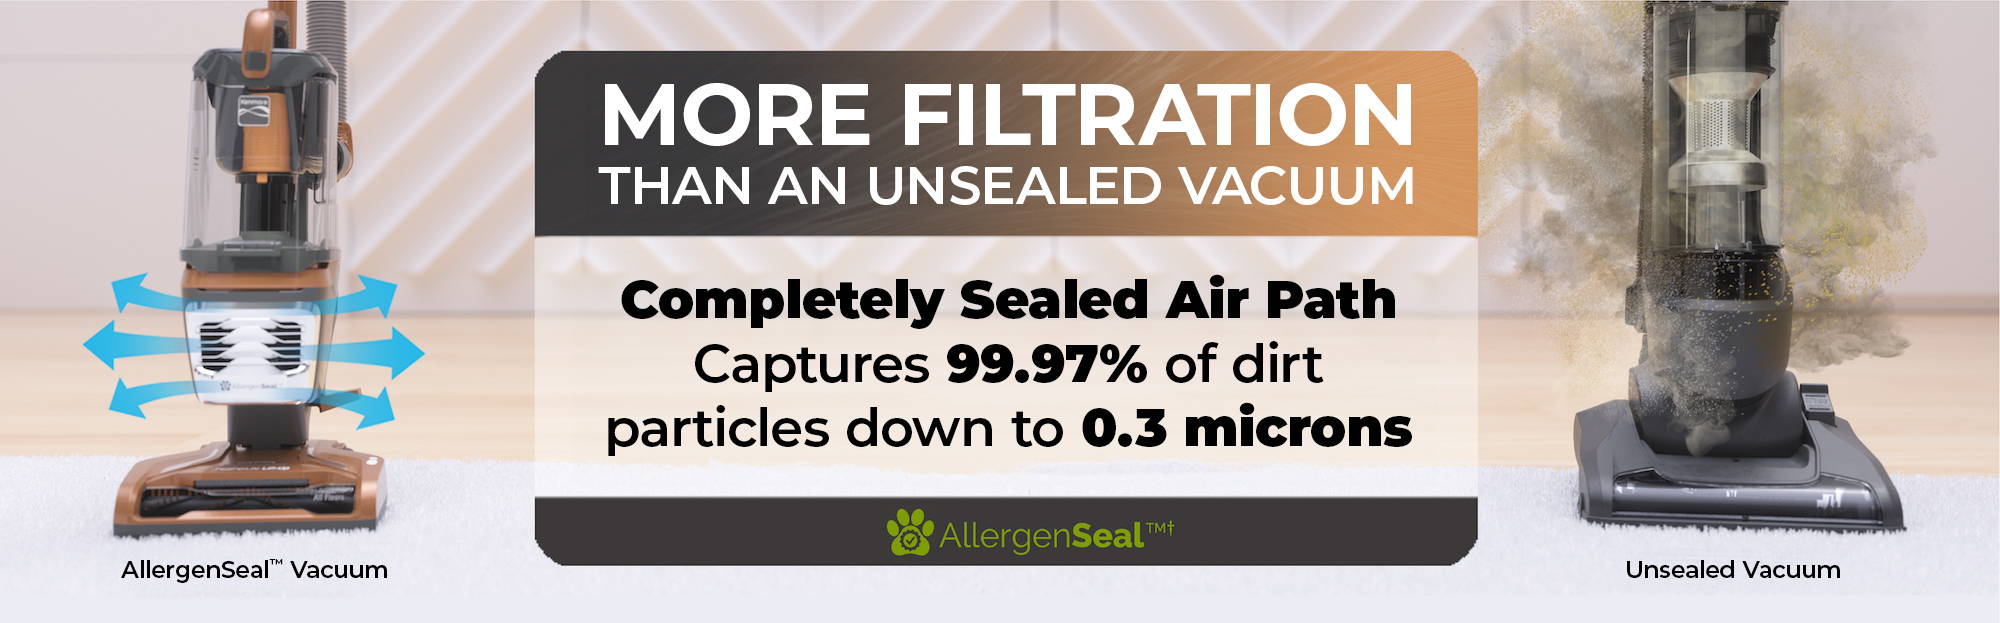 AllergenSeal™ more filtration than an unsealed vacuum